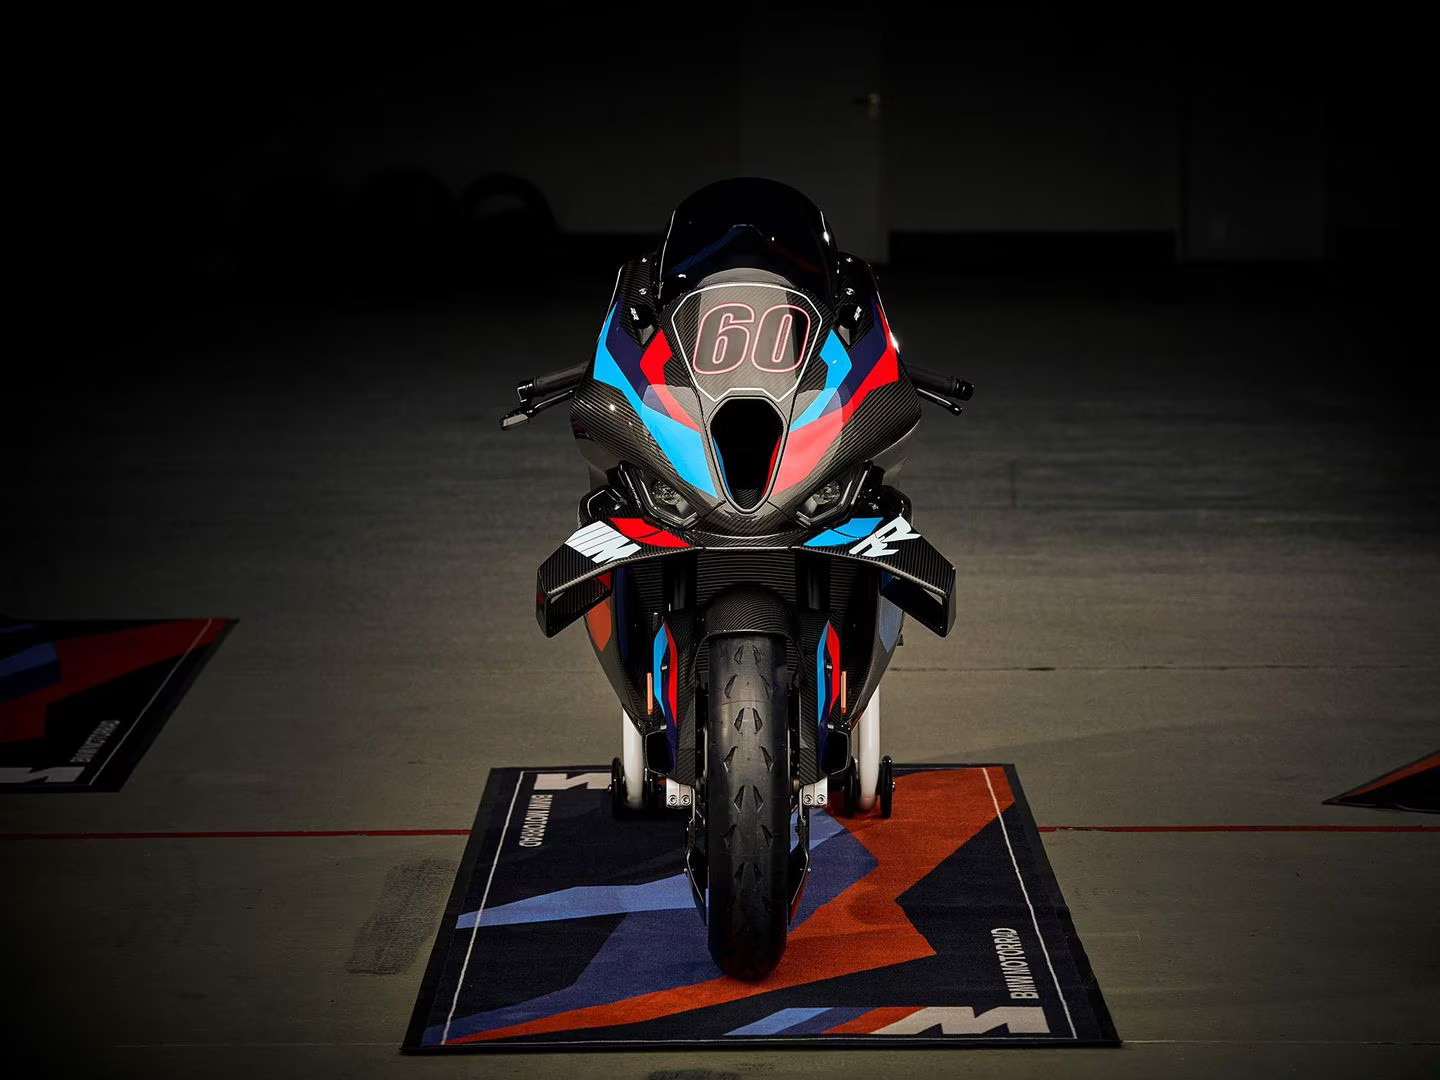 BMW's Most Expensive Superbike Launched in India at Rs 49 lakh - closeup